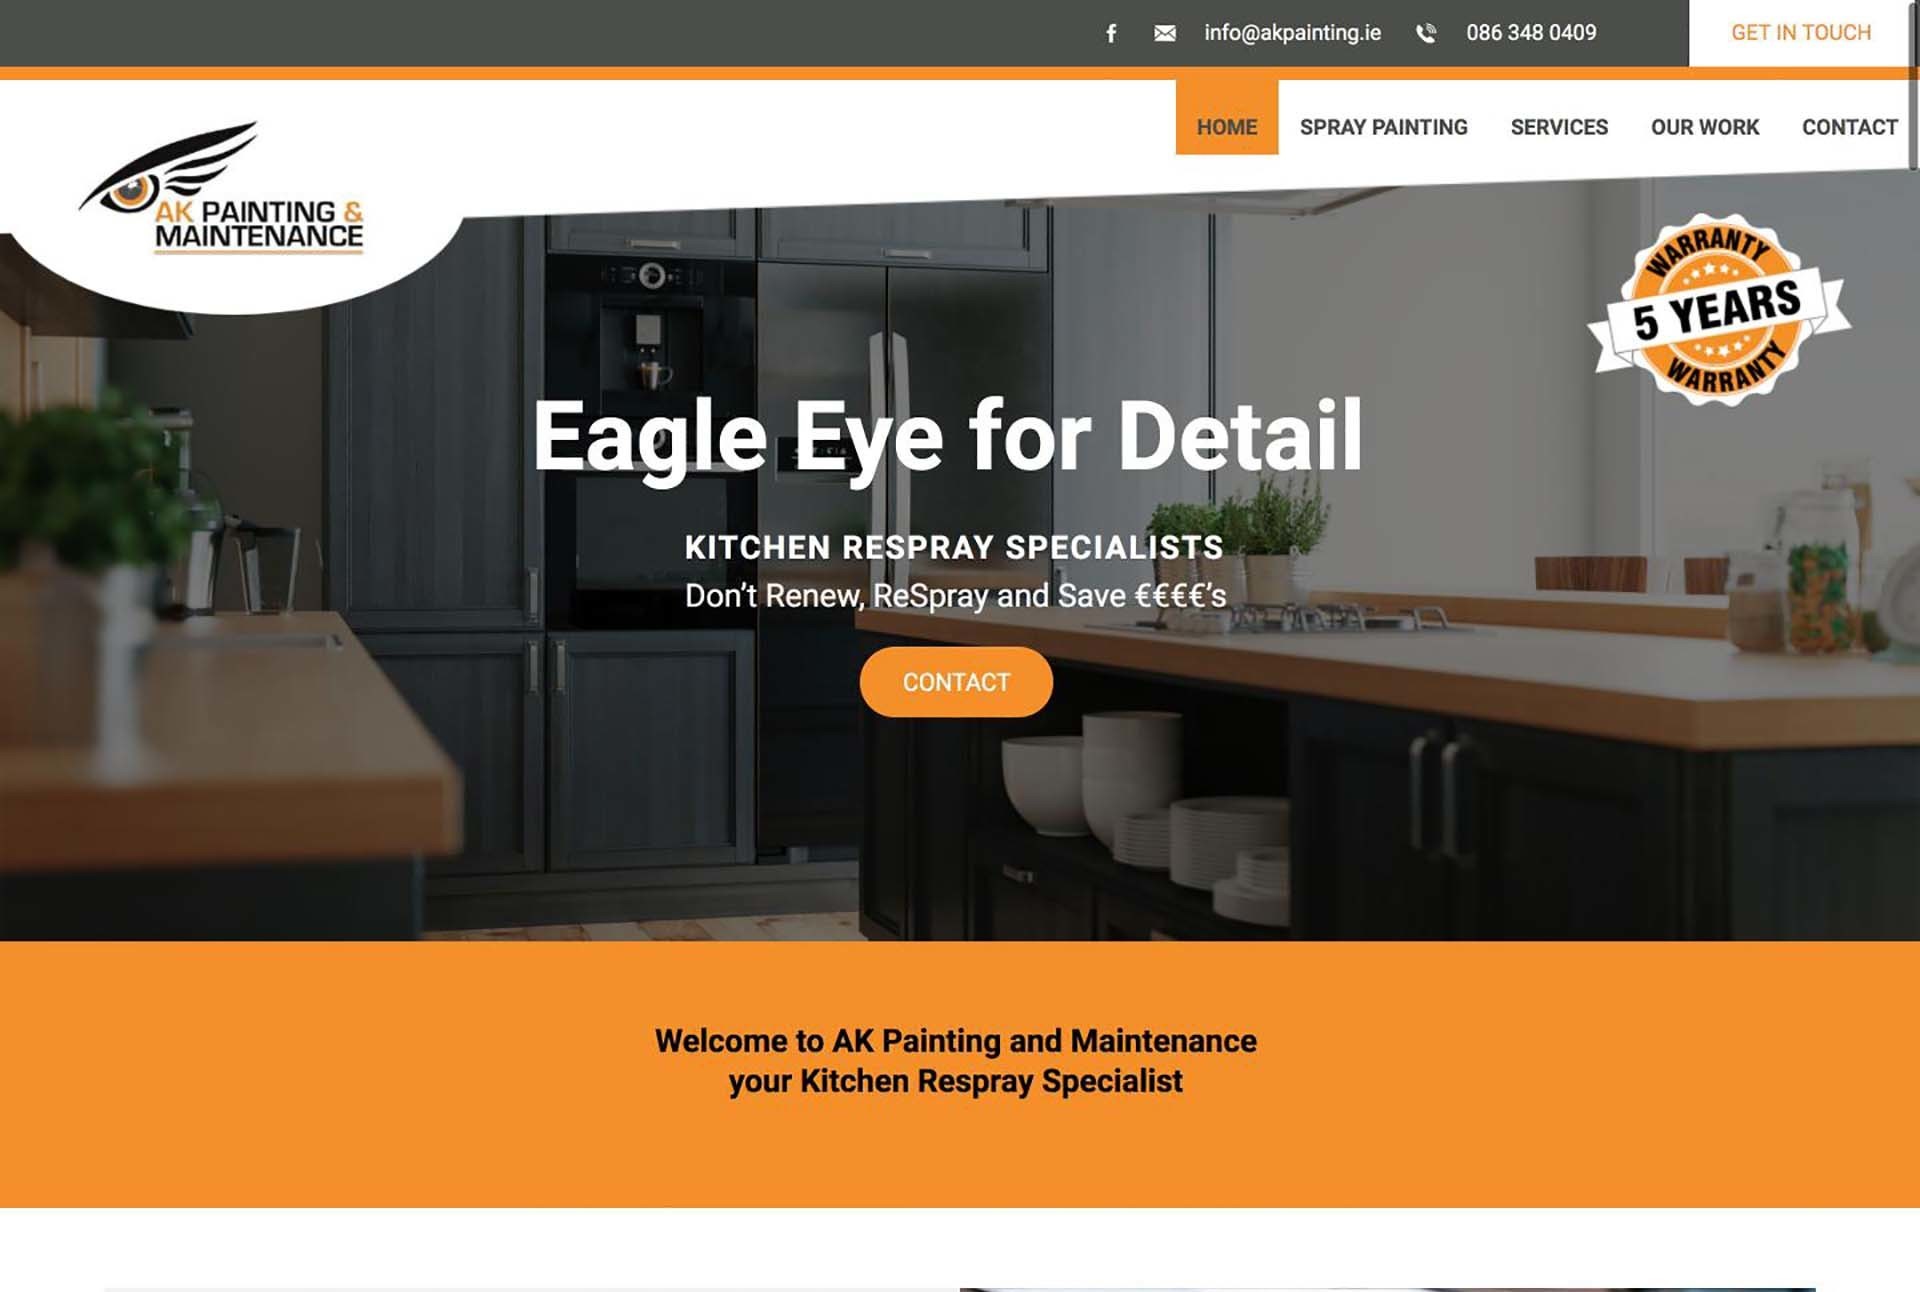 AK Painting and Maintenance website design